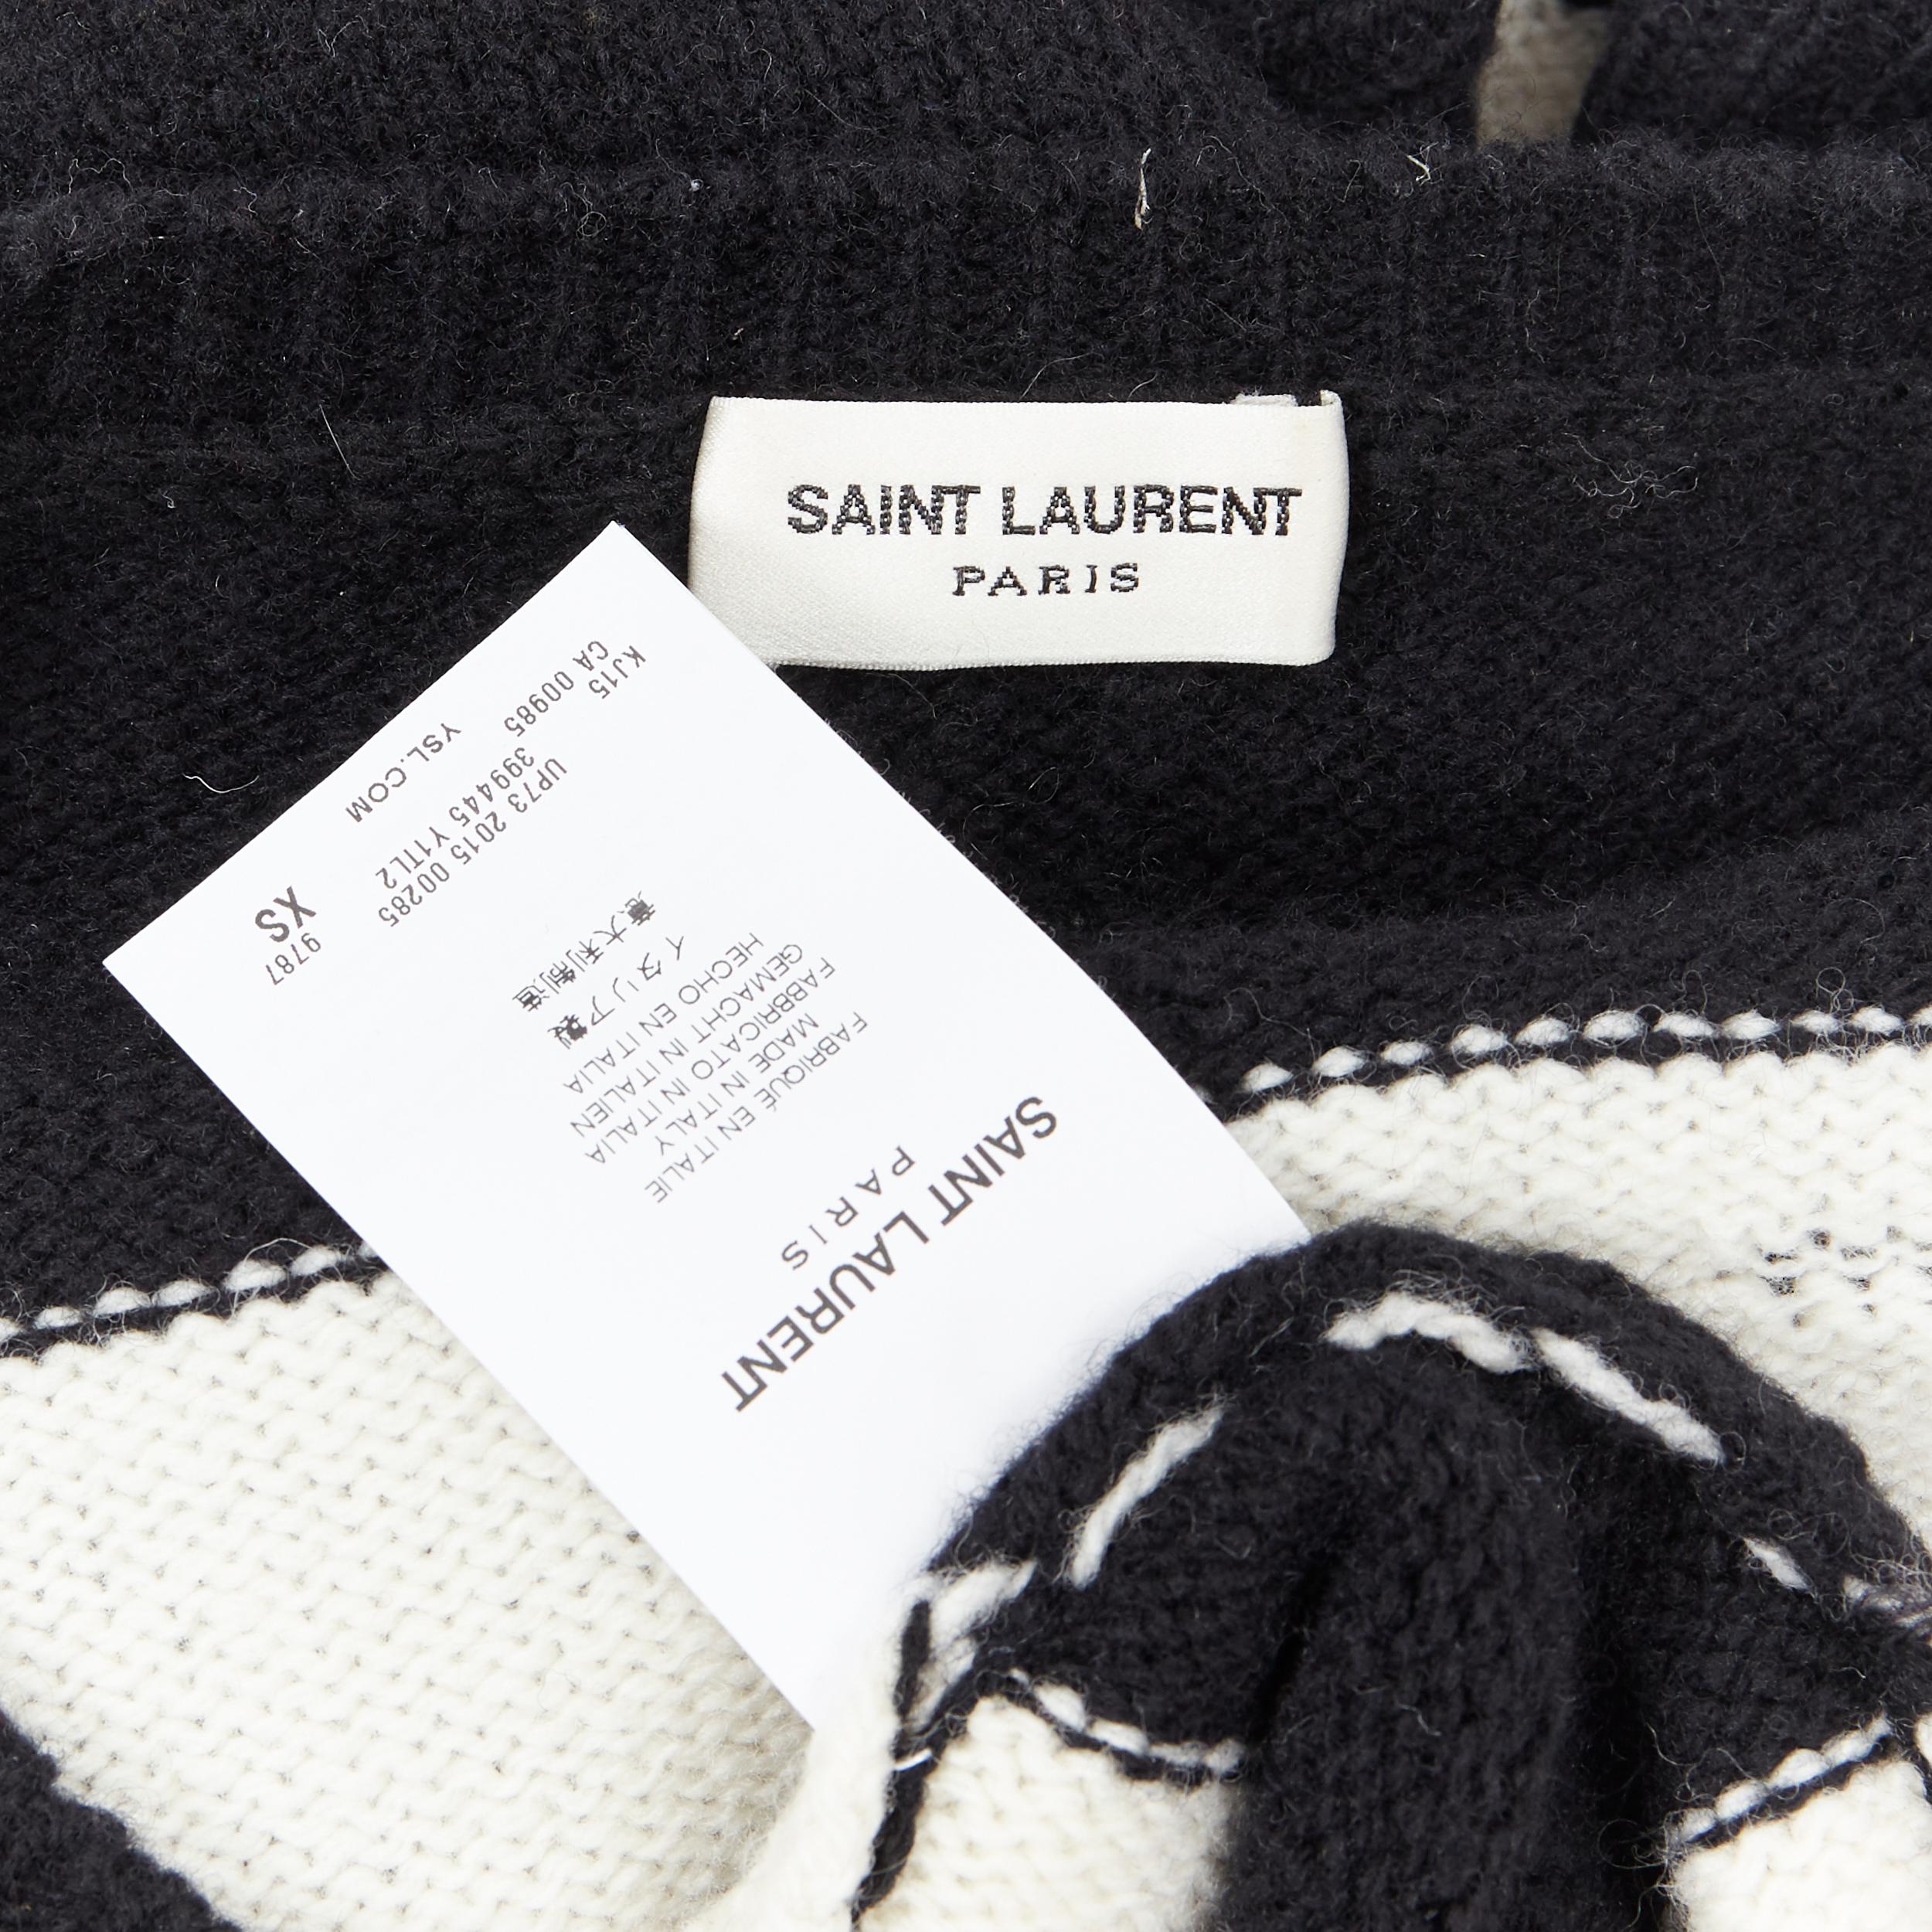 SAINT LAURENT 2015 black white striped distressed holey knit sweater top XS 3